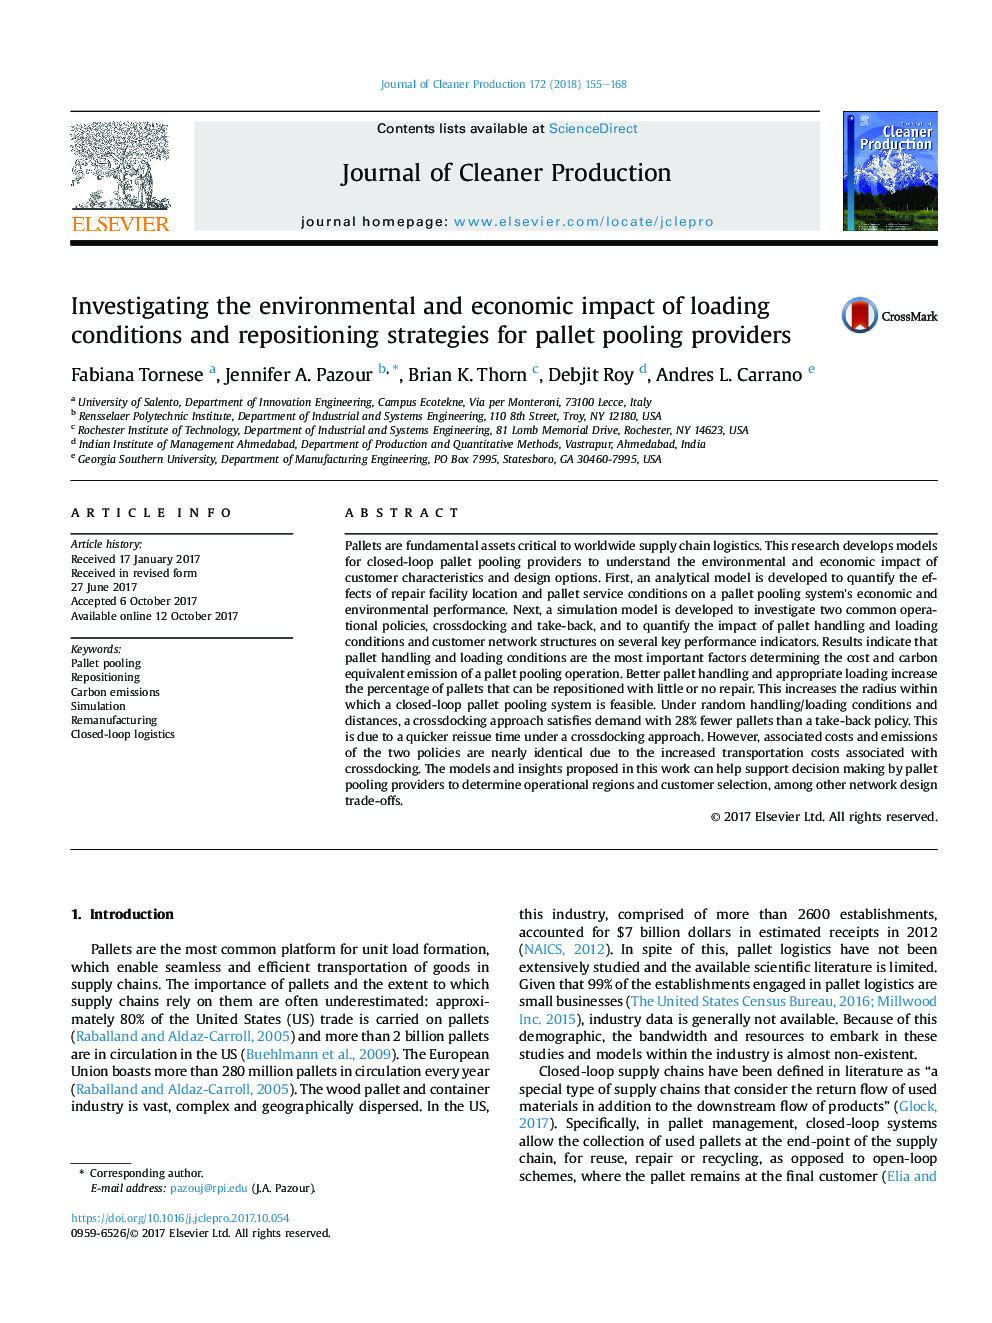 Investigating the environmental and economic impact of loading conditions and repositioning strategies for pallet pooling providers